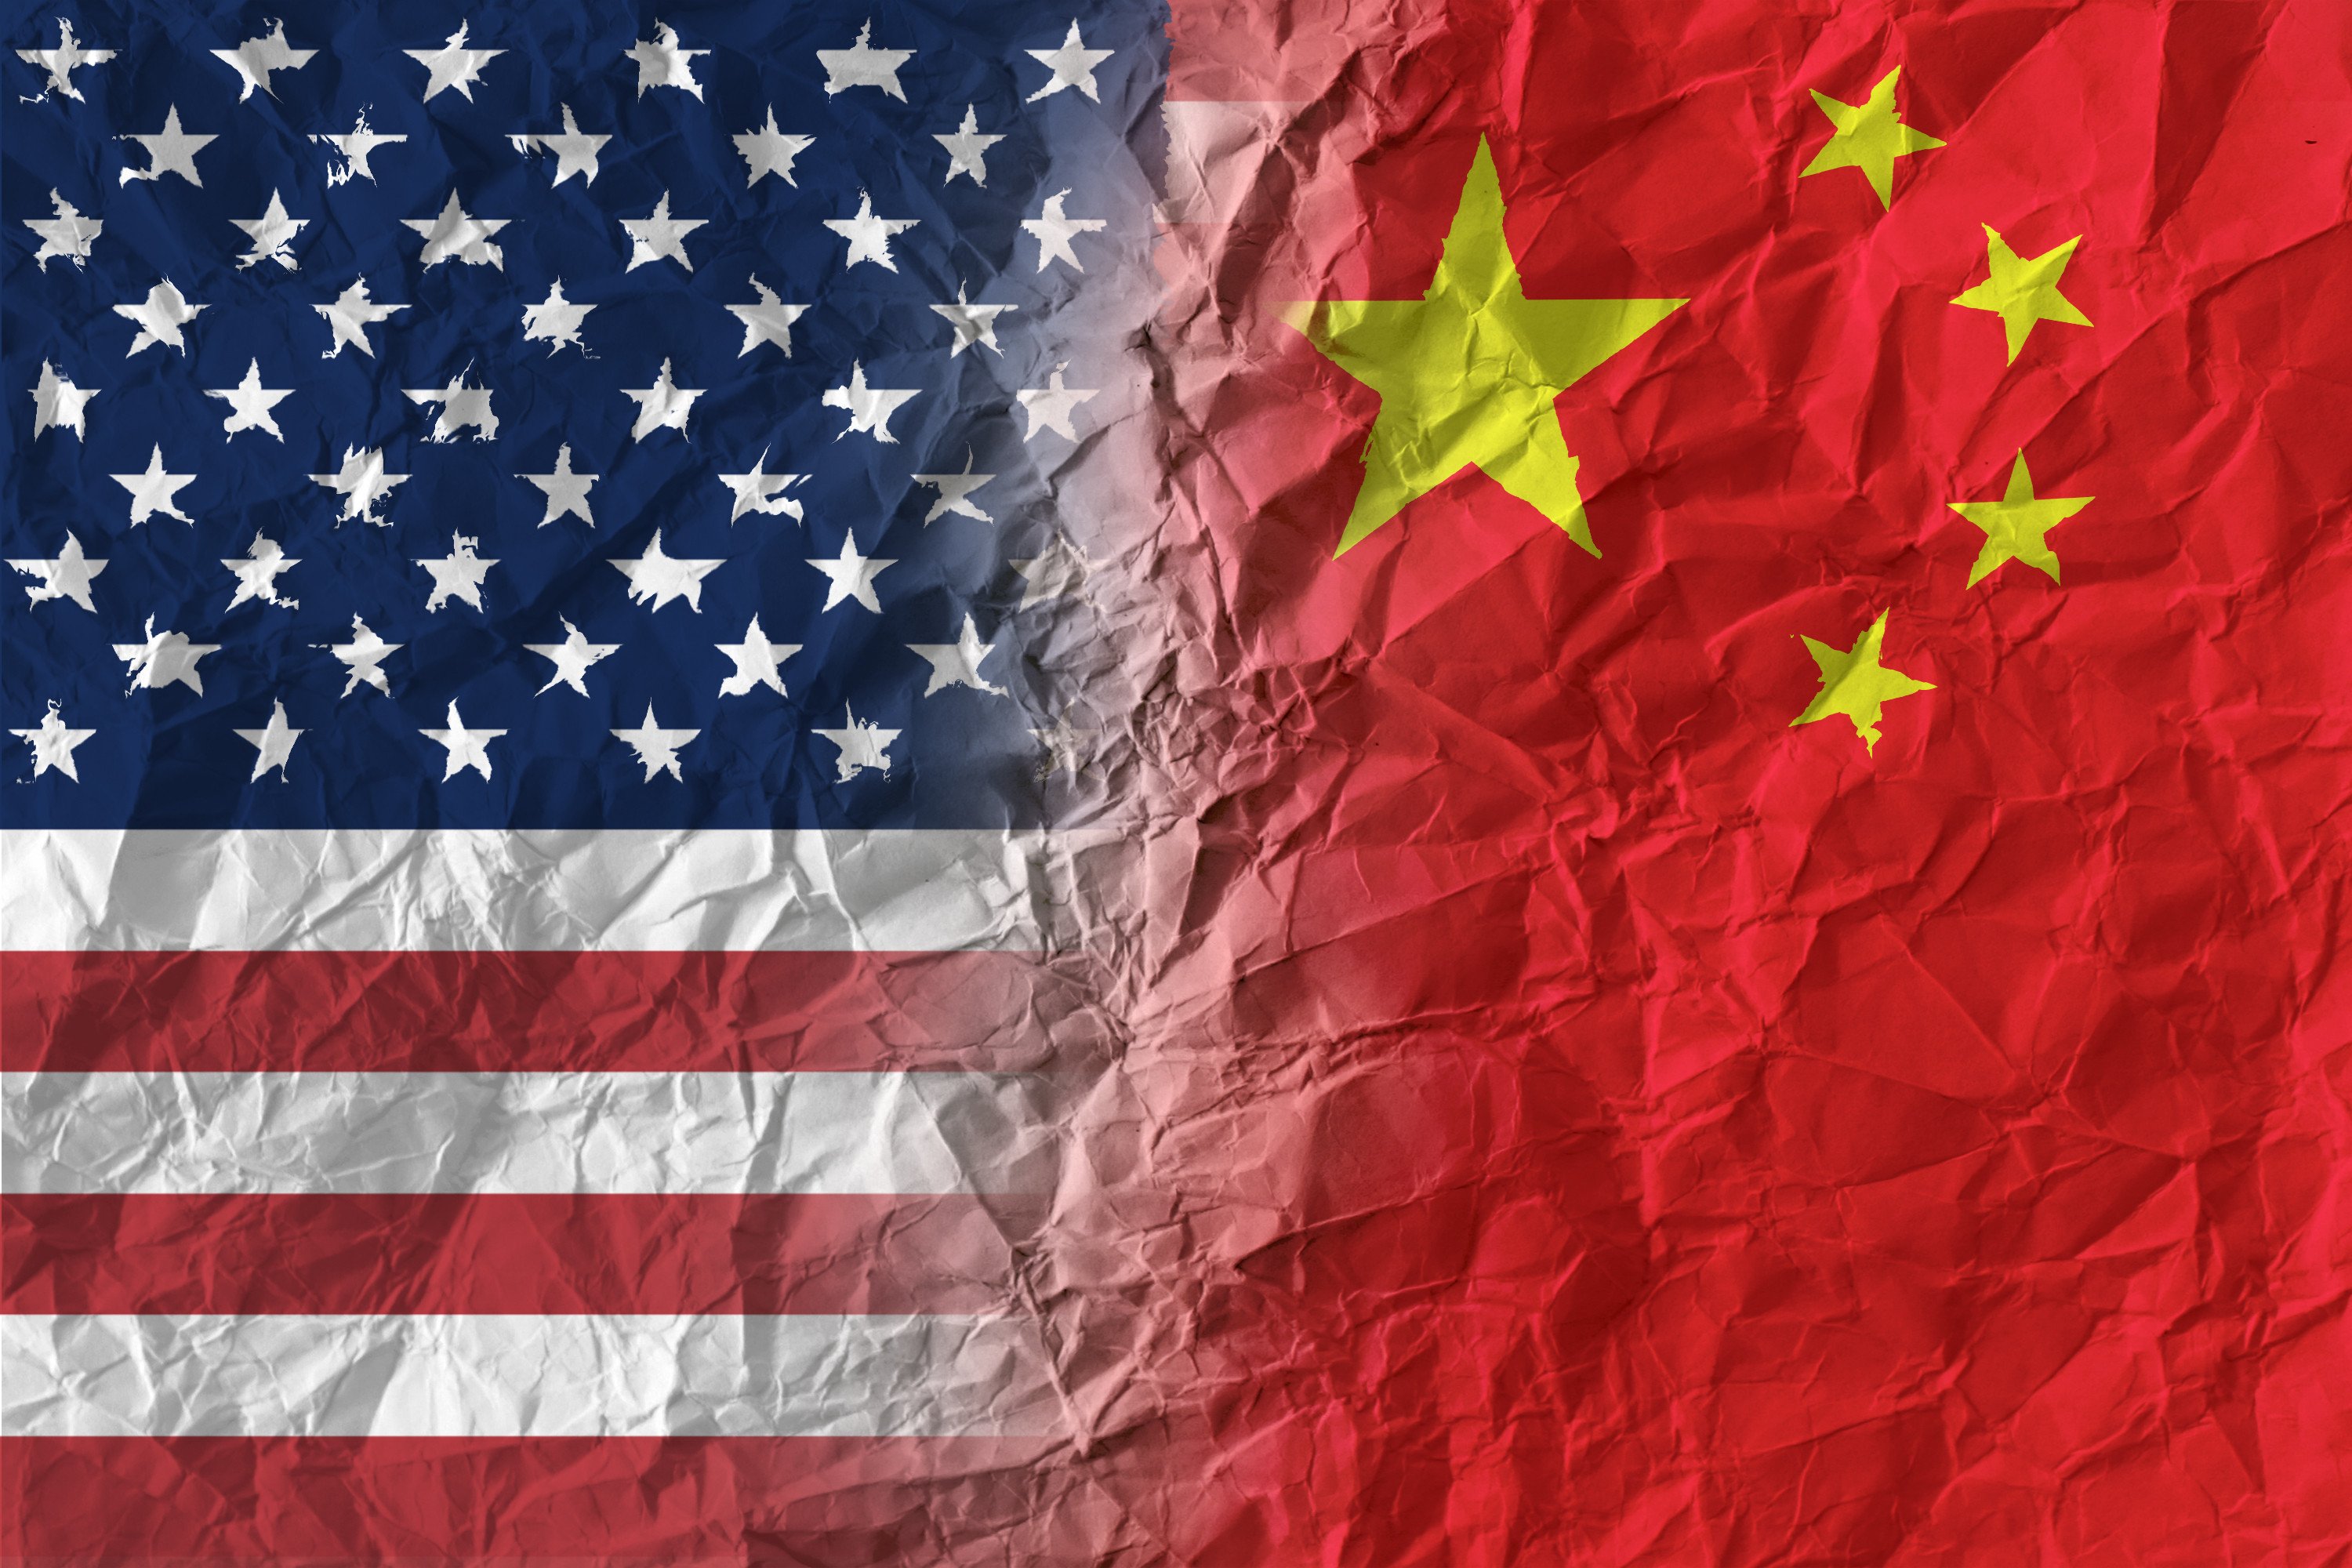 While China and the US retain a high degree of engagement, a new report finds that those ties are likely to diminish further this year. Photo: Shutterstock